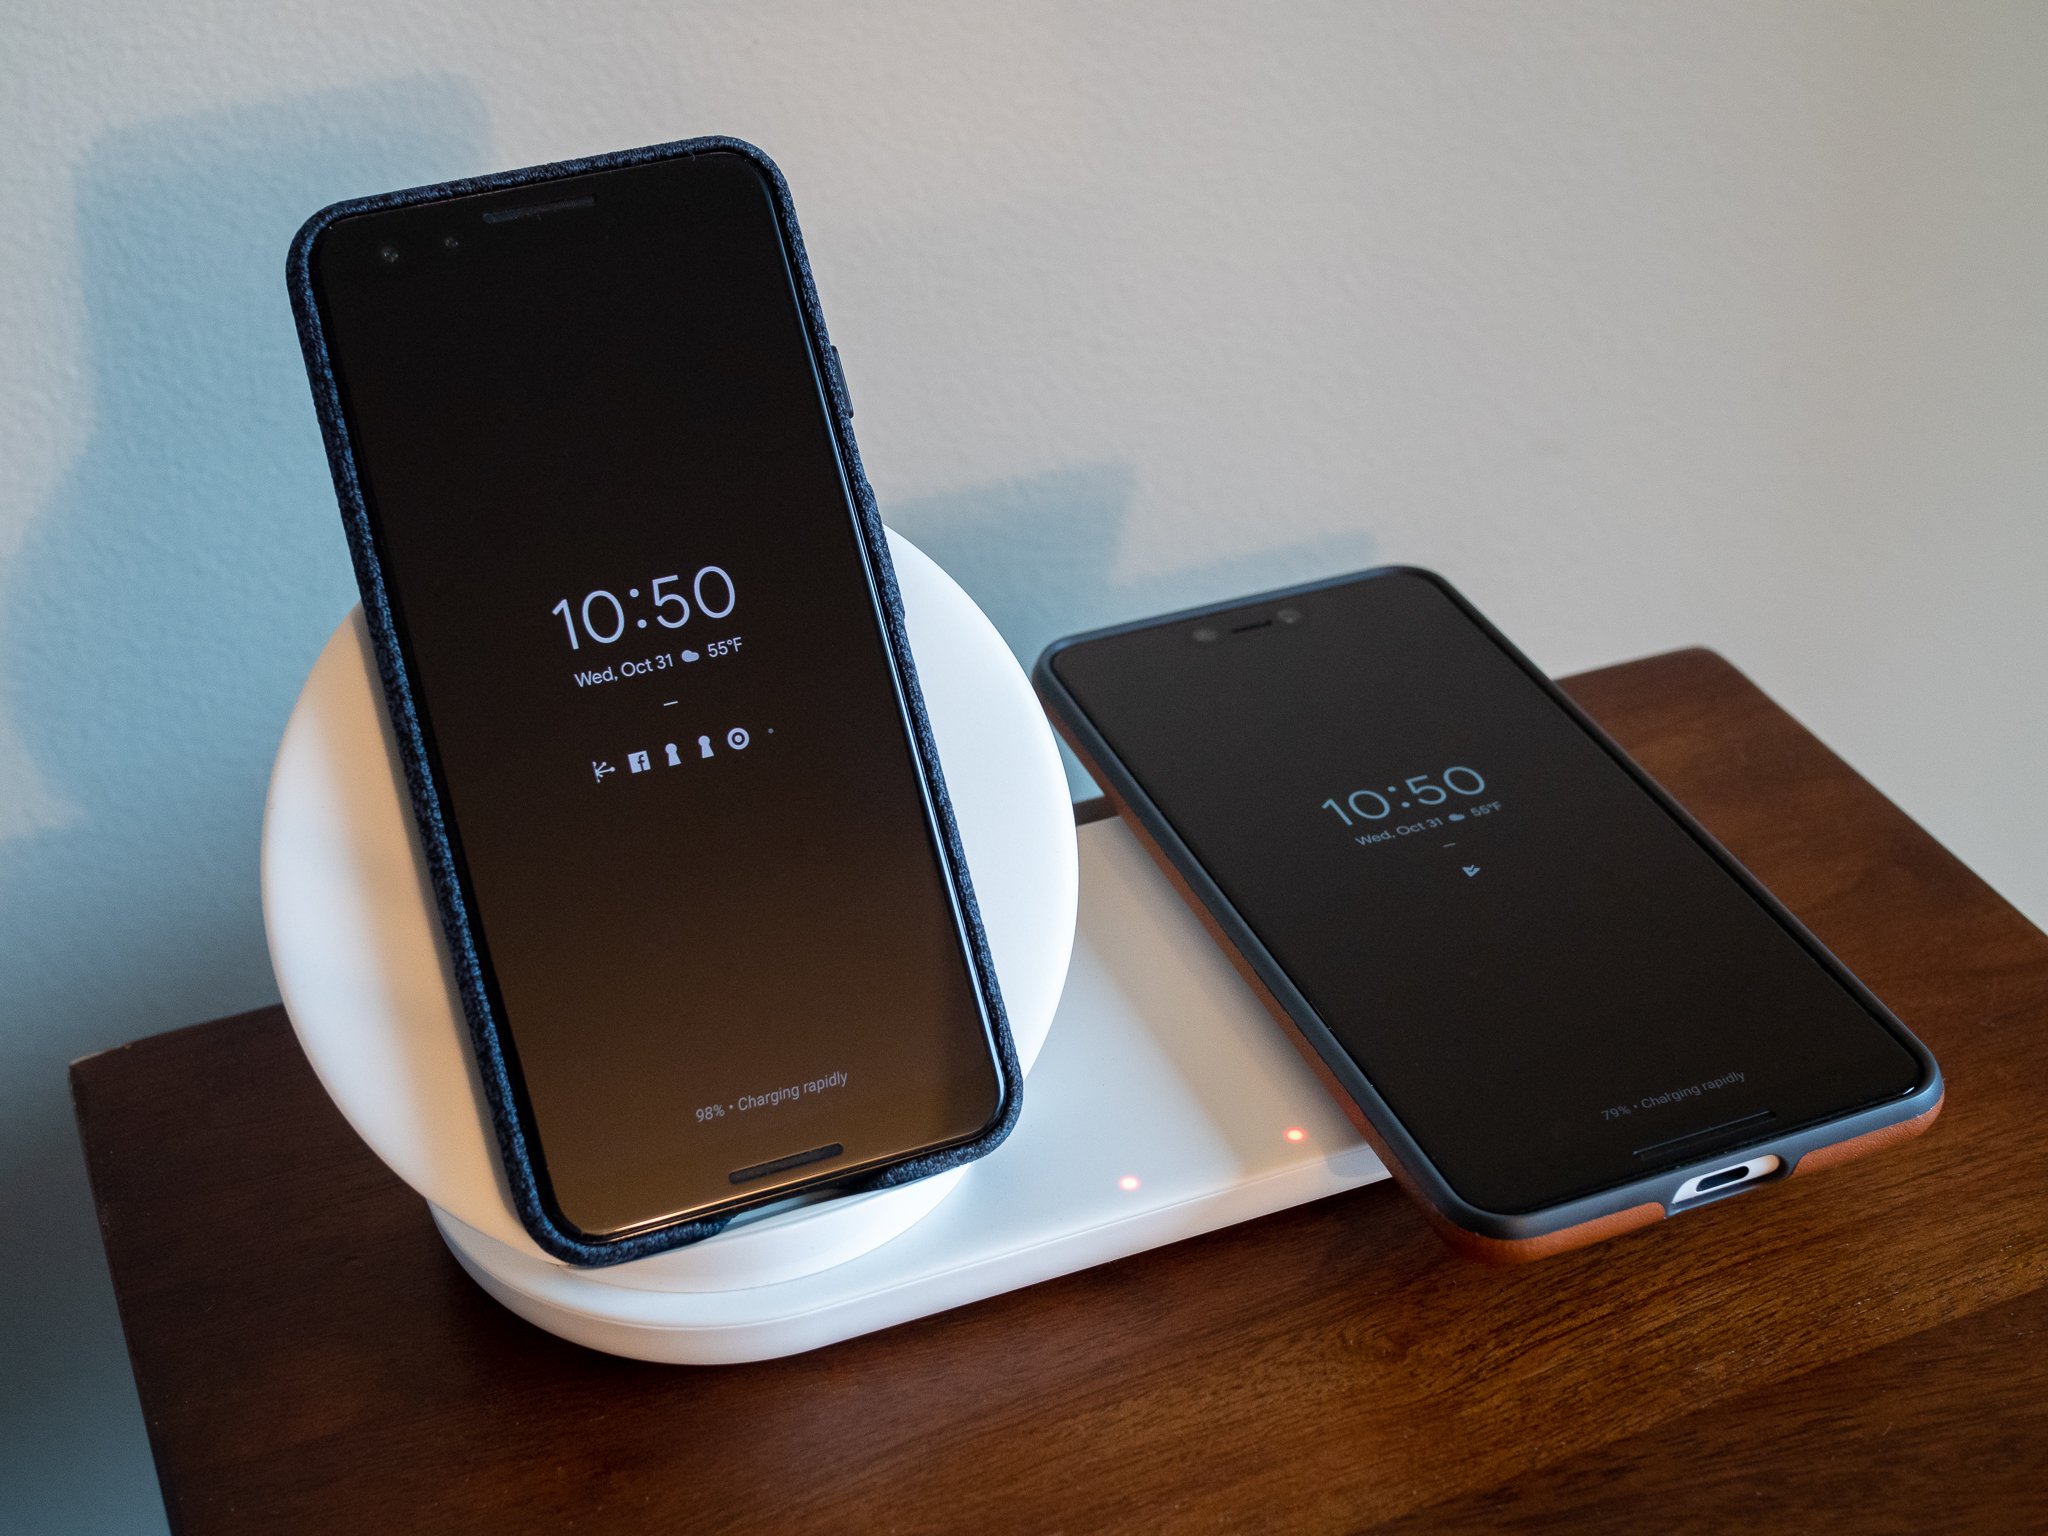 Samsung Wireless Charger Duo in use